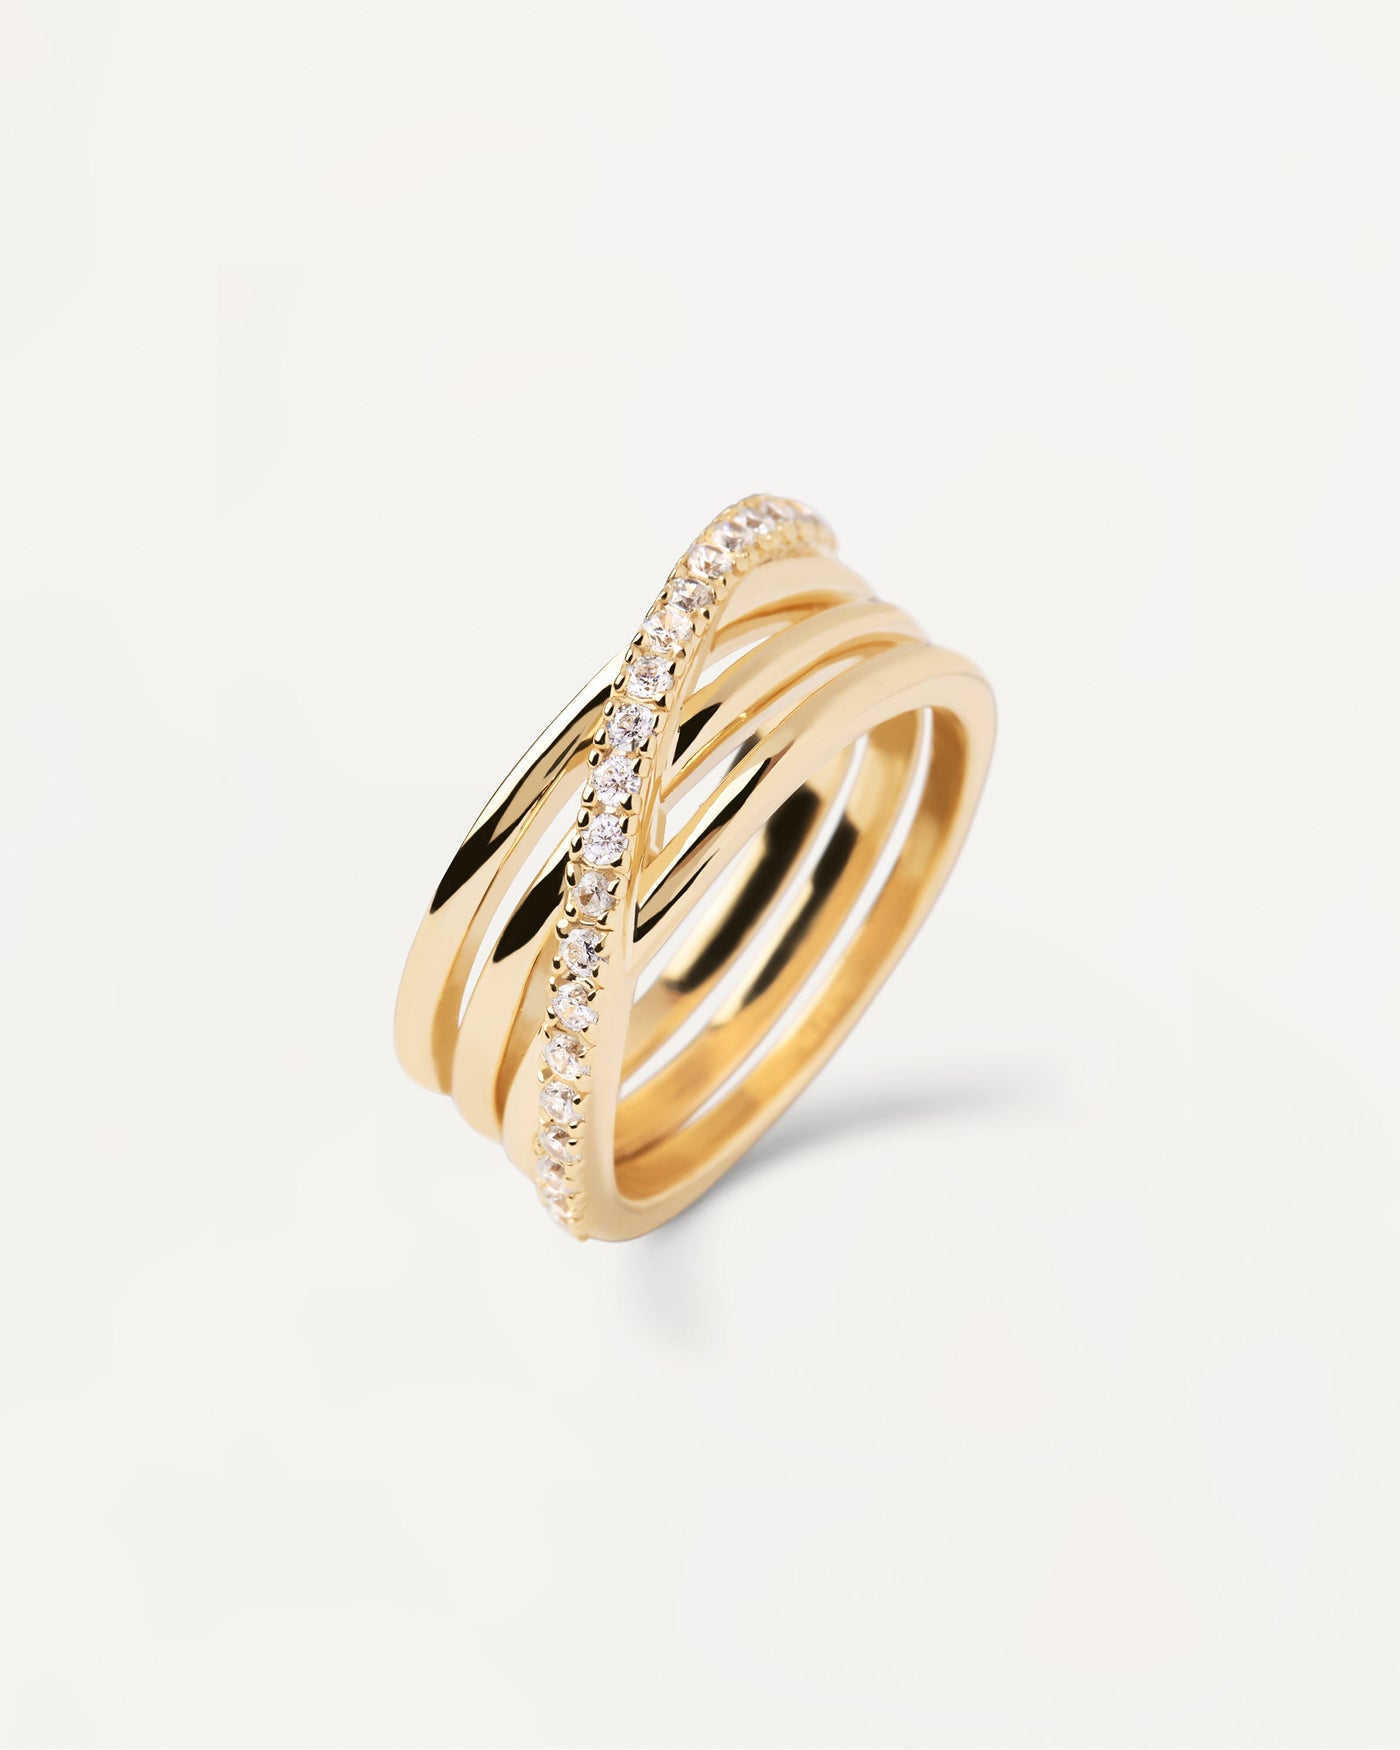 2023 Selection | Cruise Ring. Gold-plated silver ring with 4 bars and white zirconia. Get the latest arrival from PDPAOLA. Place your order safely and get this Best Seller. Free Shipping.